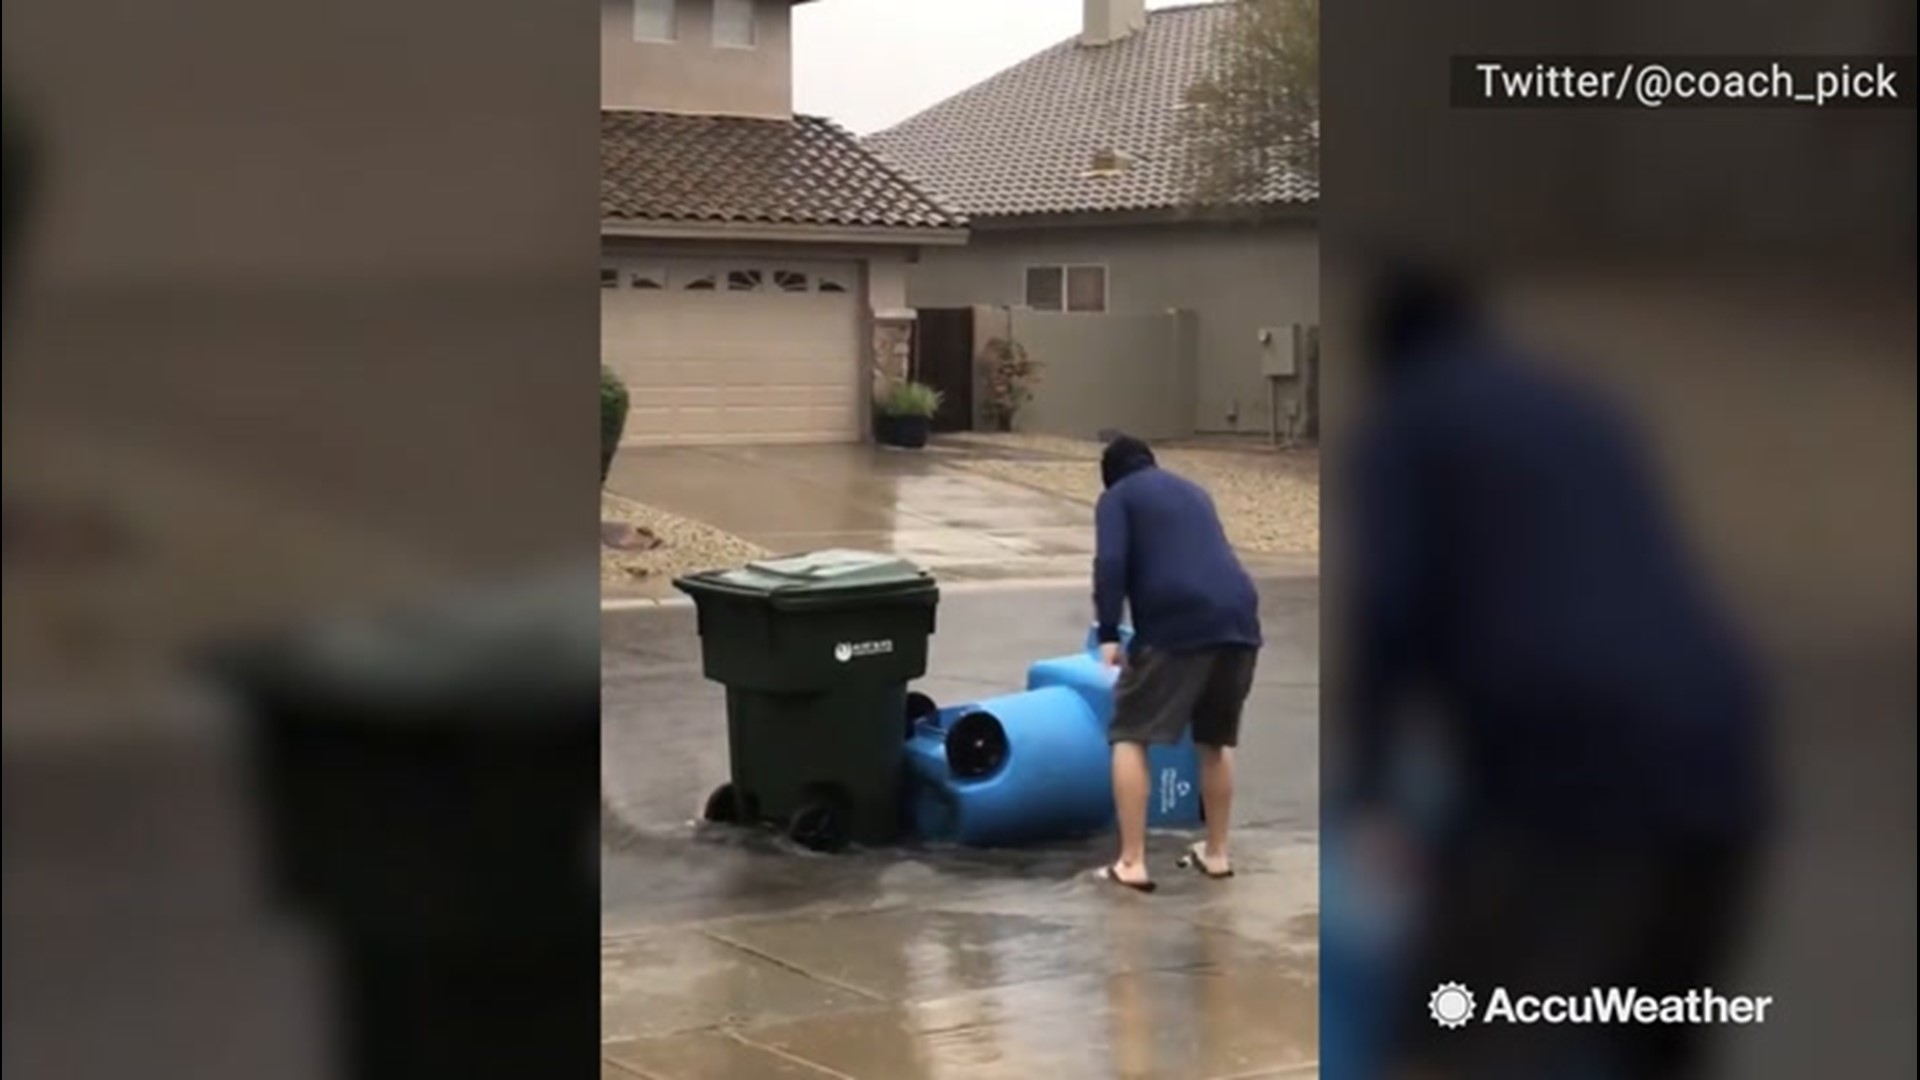 On Nov. 20, a powerful rainstorm swept through Phoenix, Arizona, completely inundating streets. The floodwaters swept away one man's trashcans.